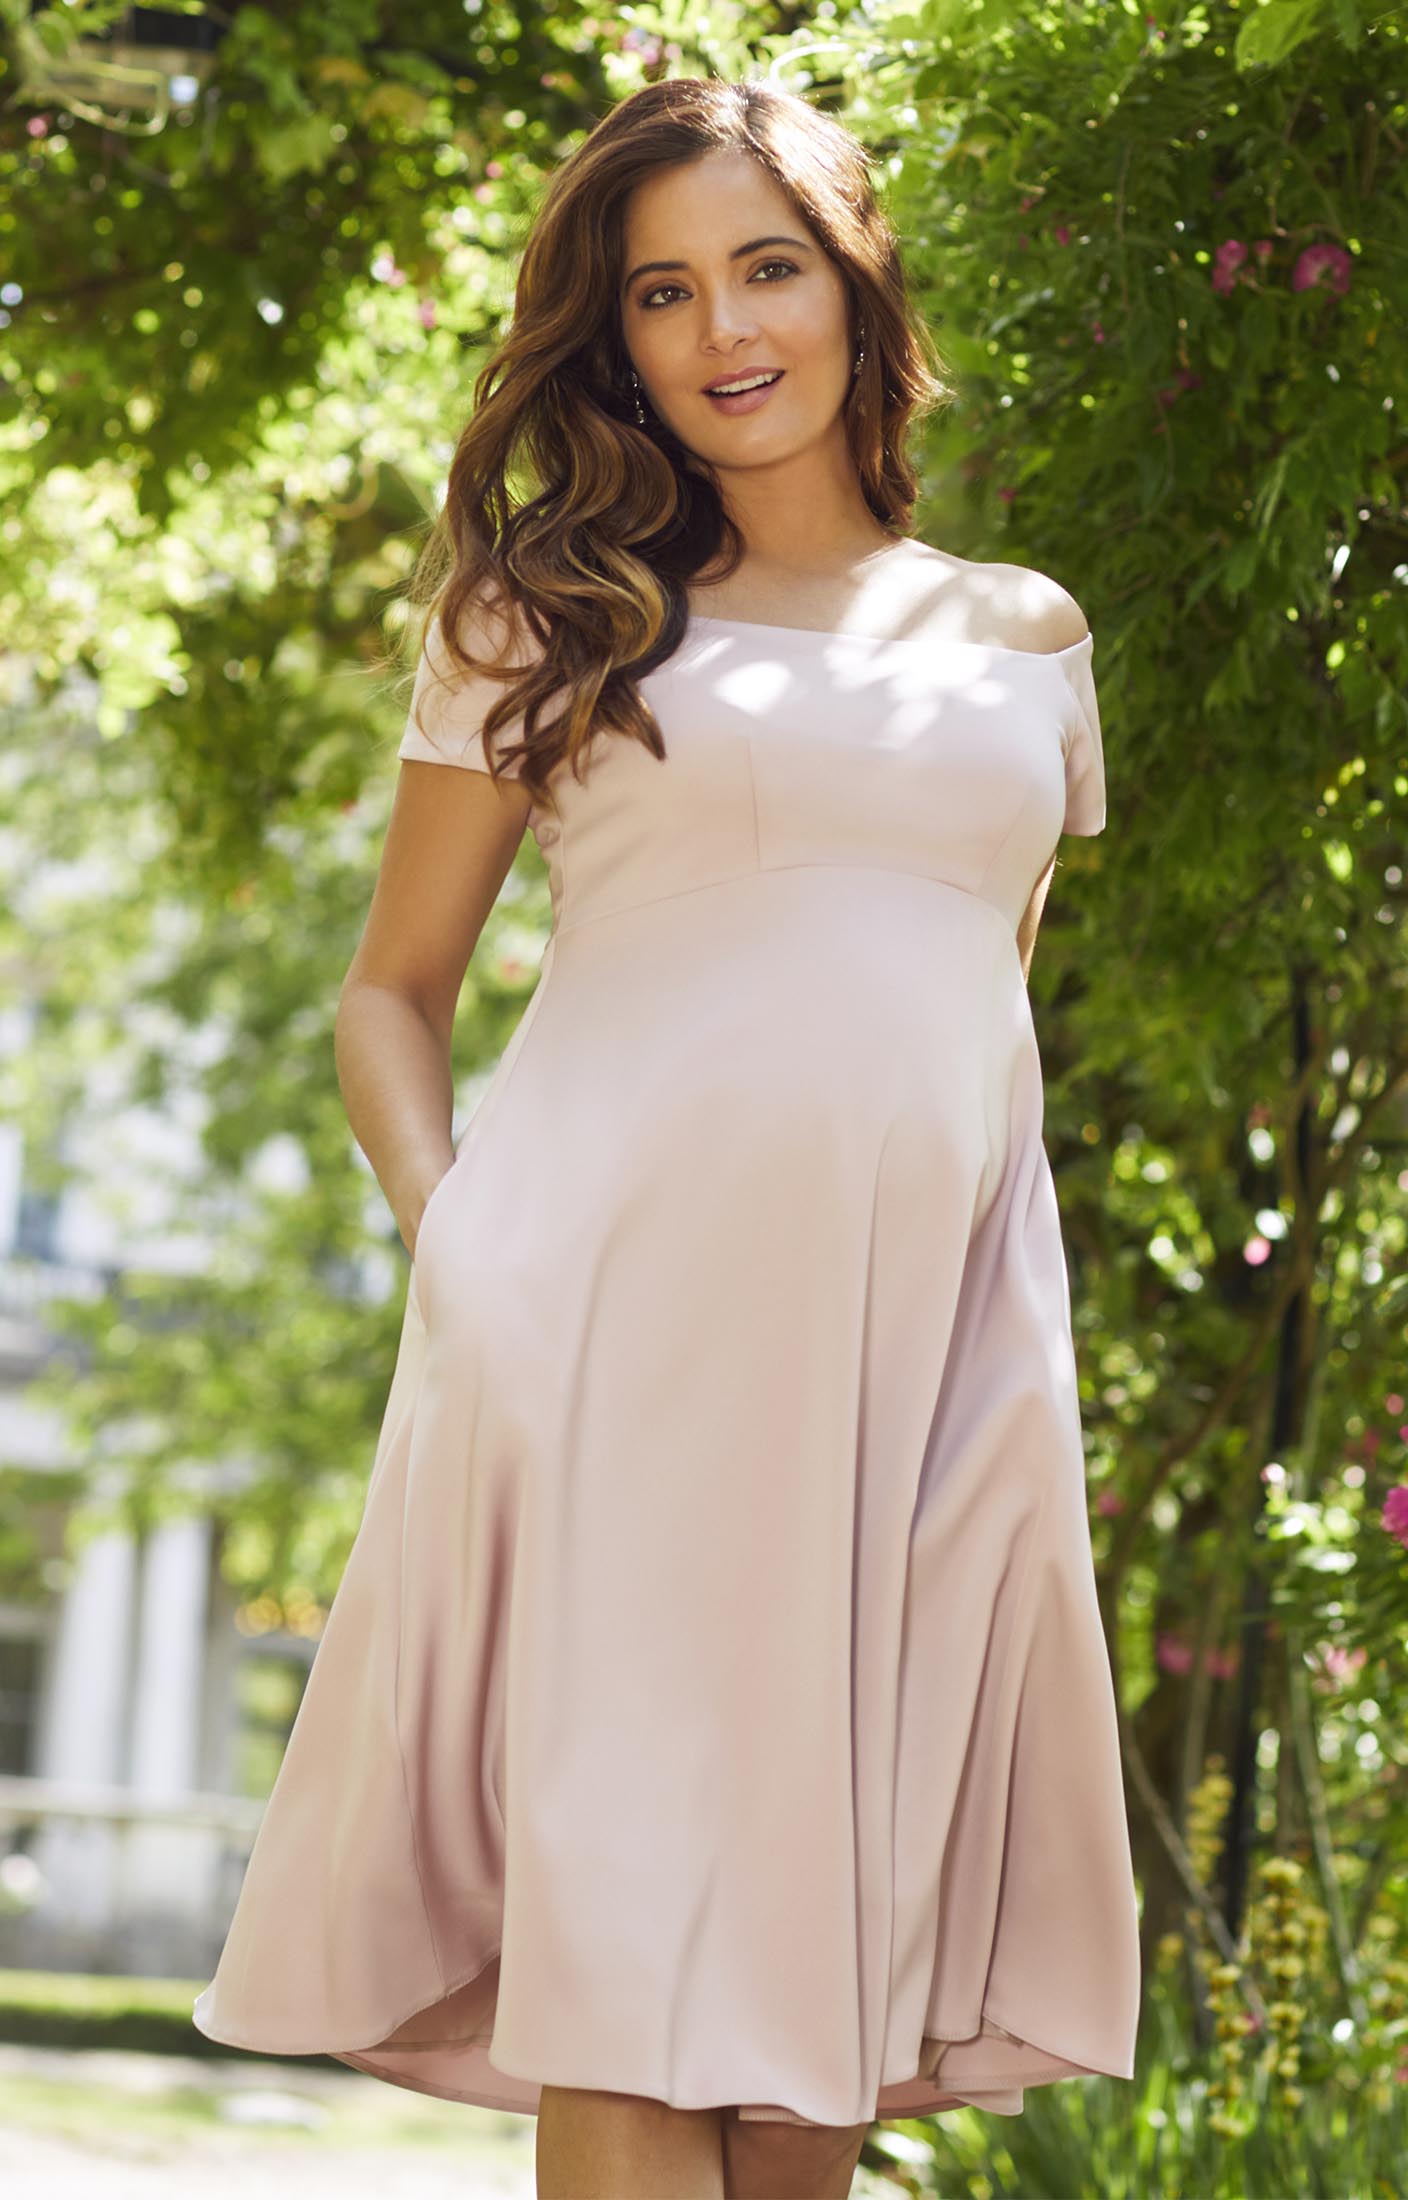 Leigh Arnolds fashion tips for pregnancy Stay away from maternity clothes   Independentie